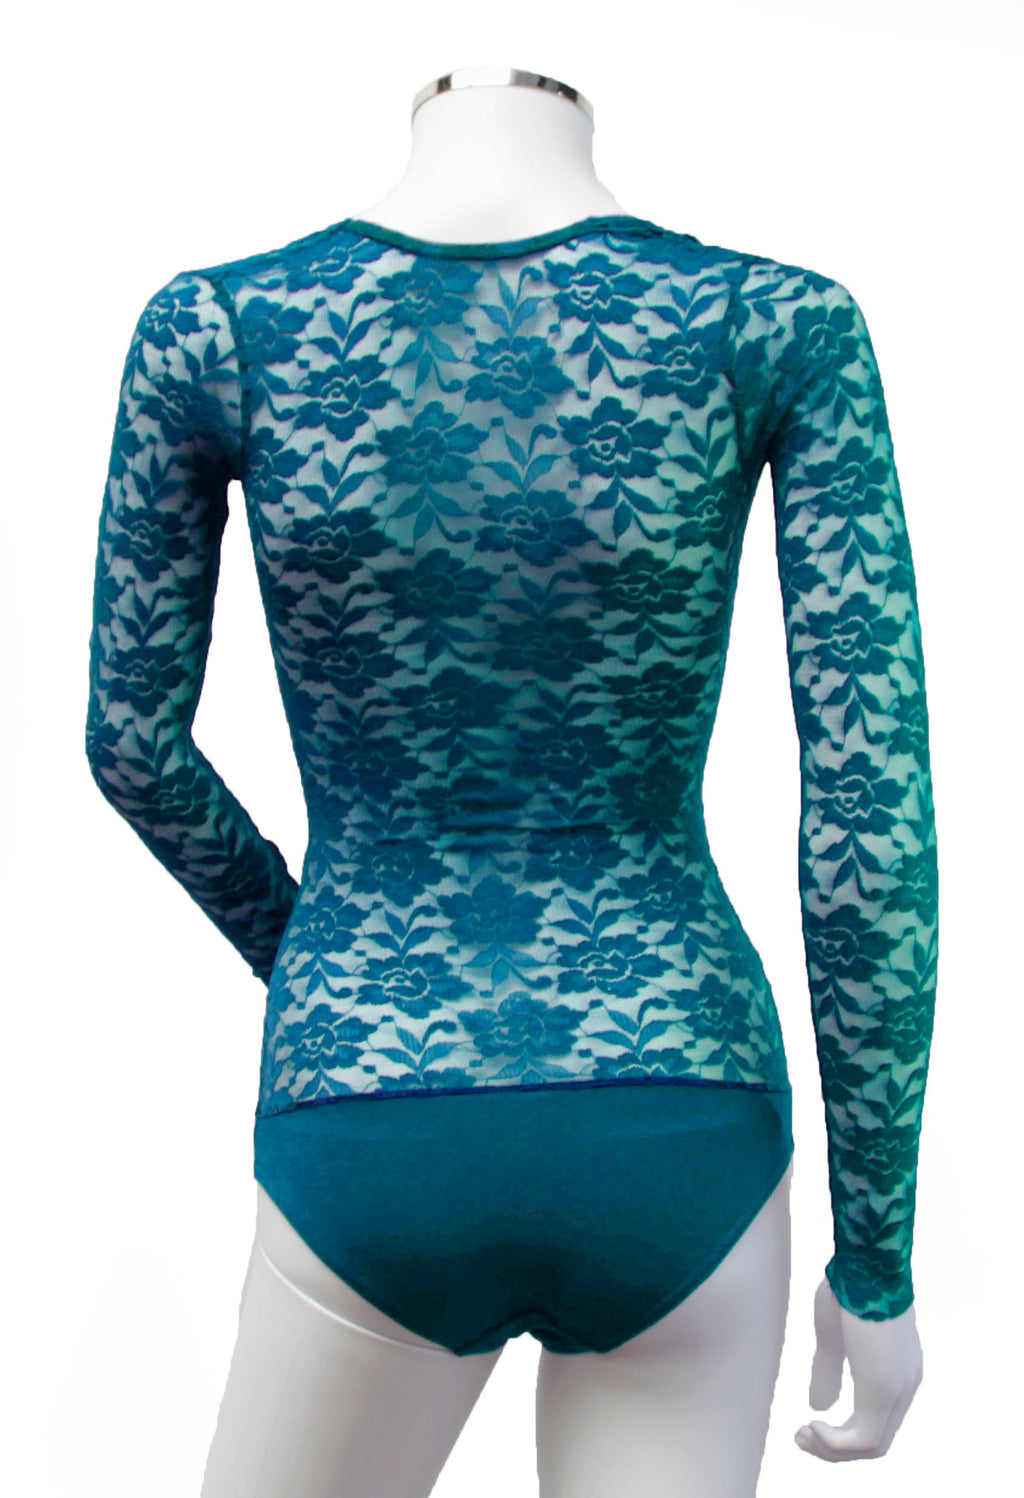 IN STOCK - Underbust with Sleeves - Turquoise Lace